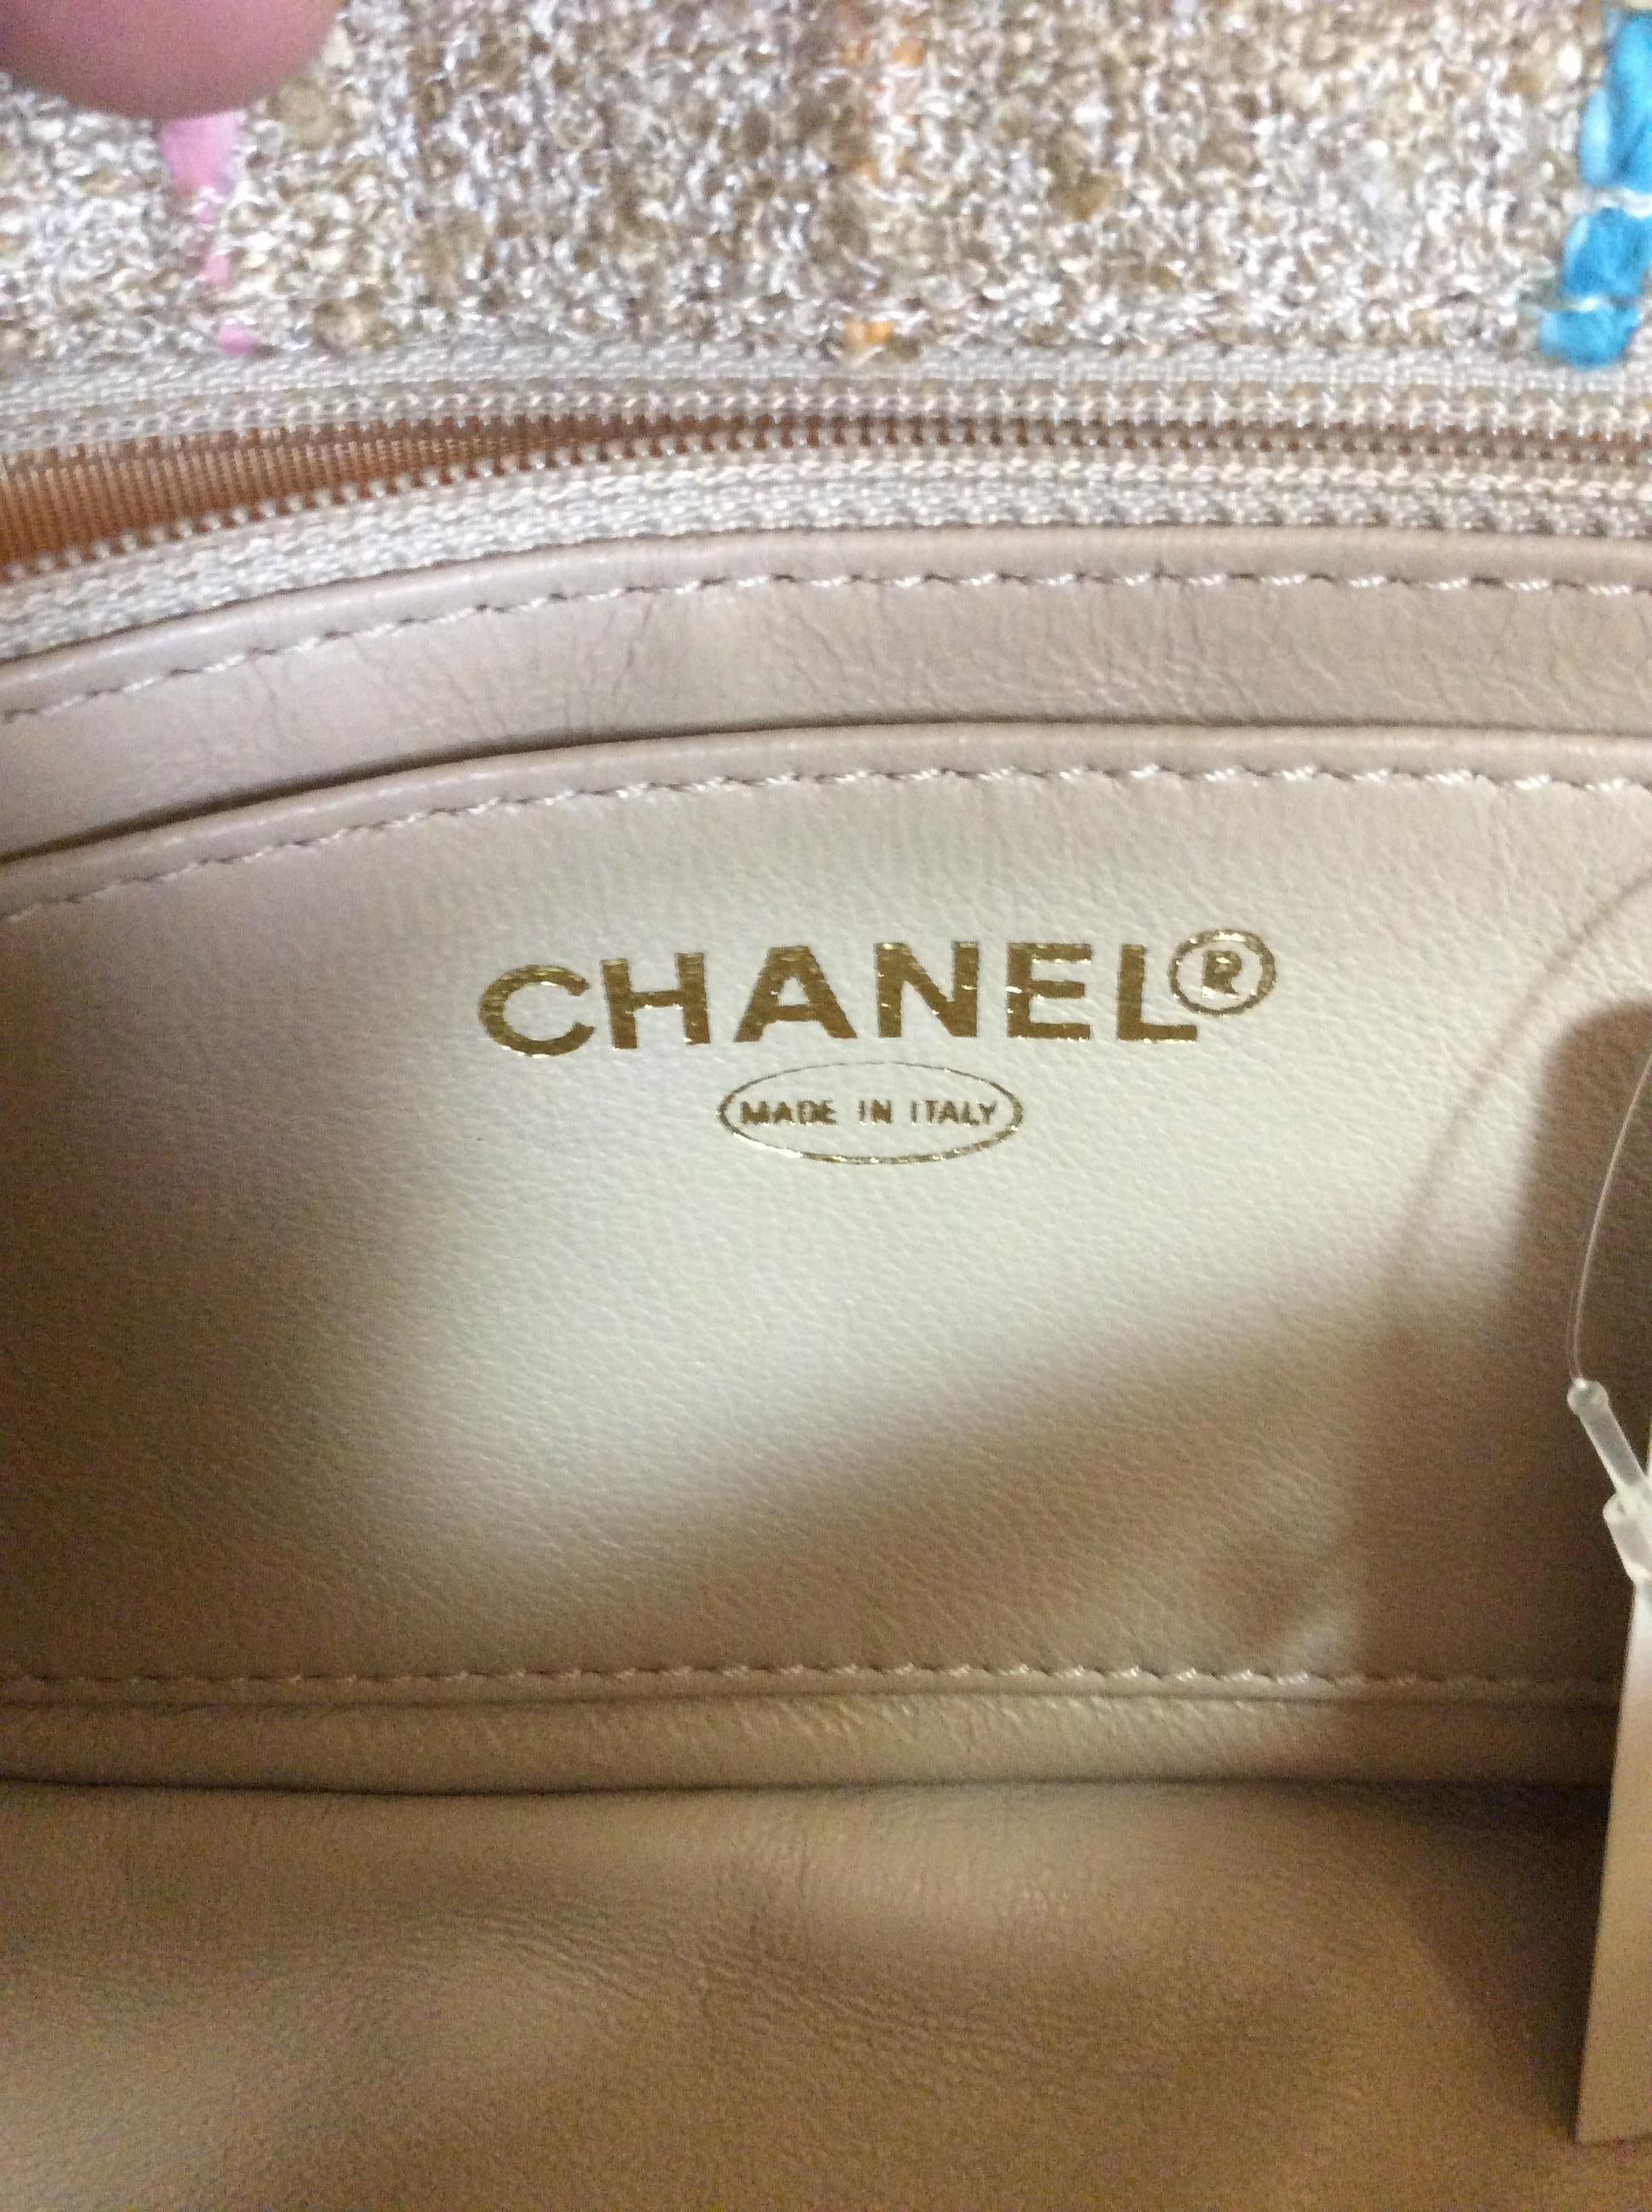 Chanel Tan and Pastel Tweed Crossbody Bag NWT For Sale 3